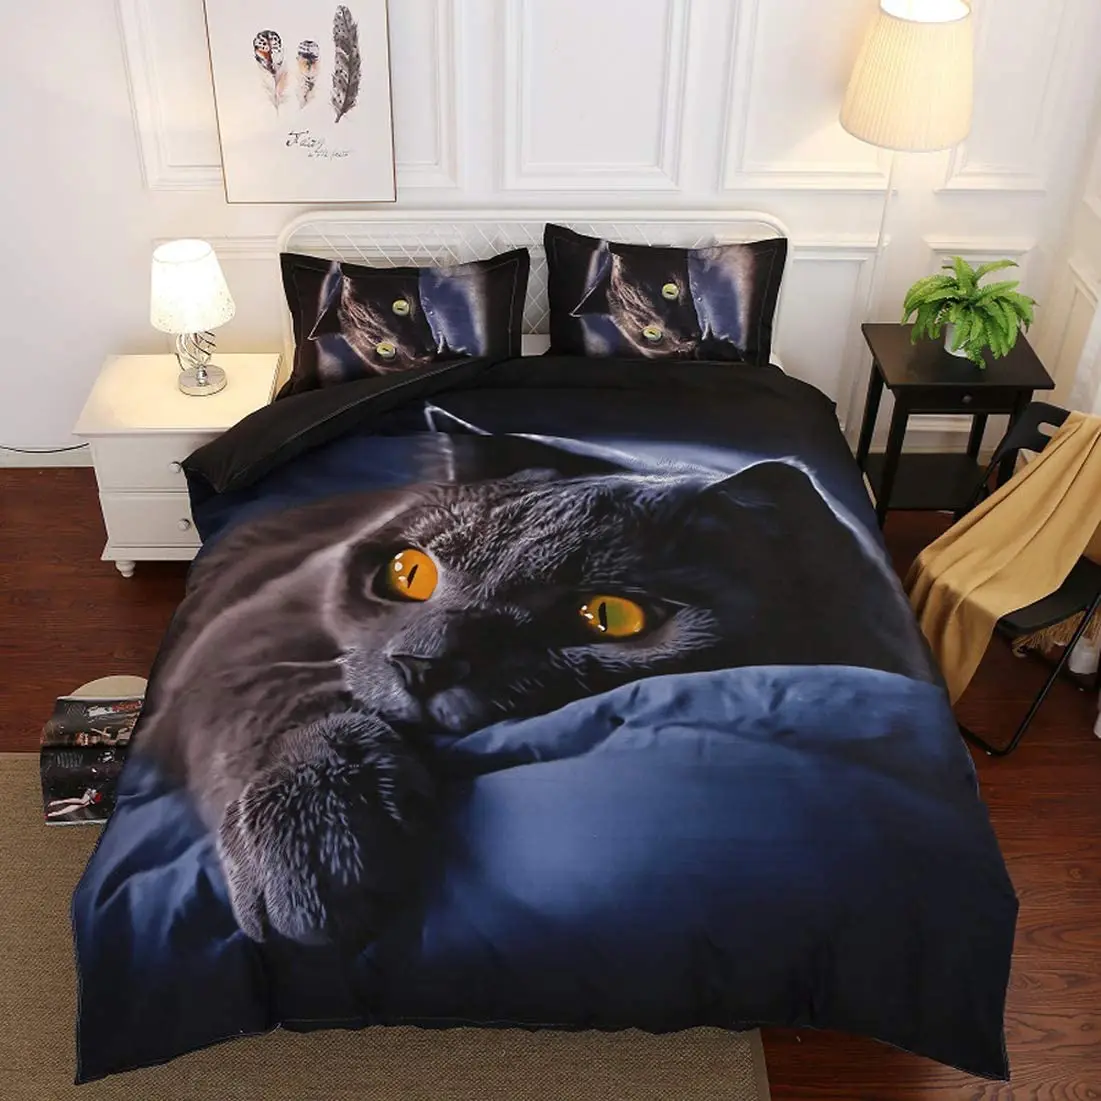 

Black Cat Bedding Set Soft Duvet Cover For Kids Adult Bed Linen Microfiber Comforter Cover Quilt Cover With Pillowcases 220×240